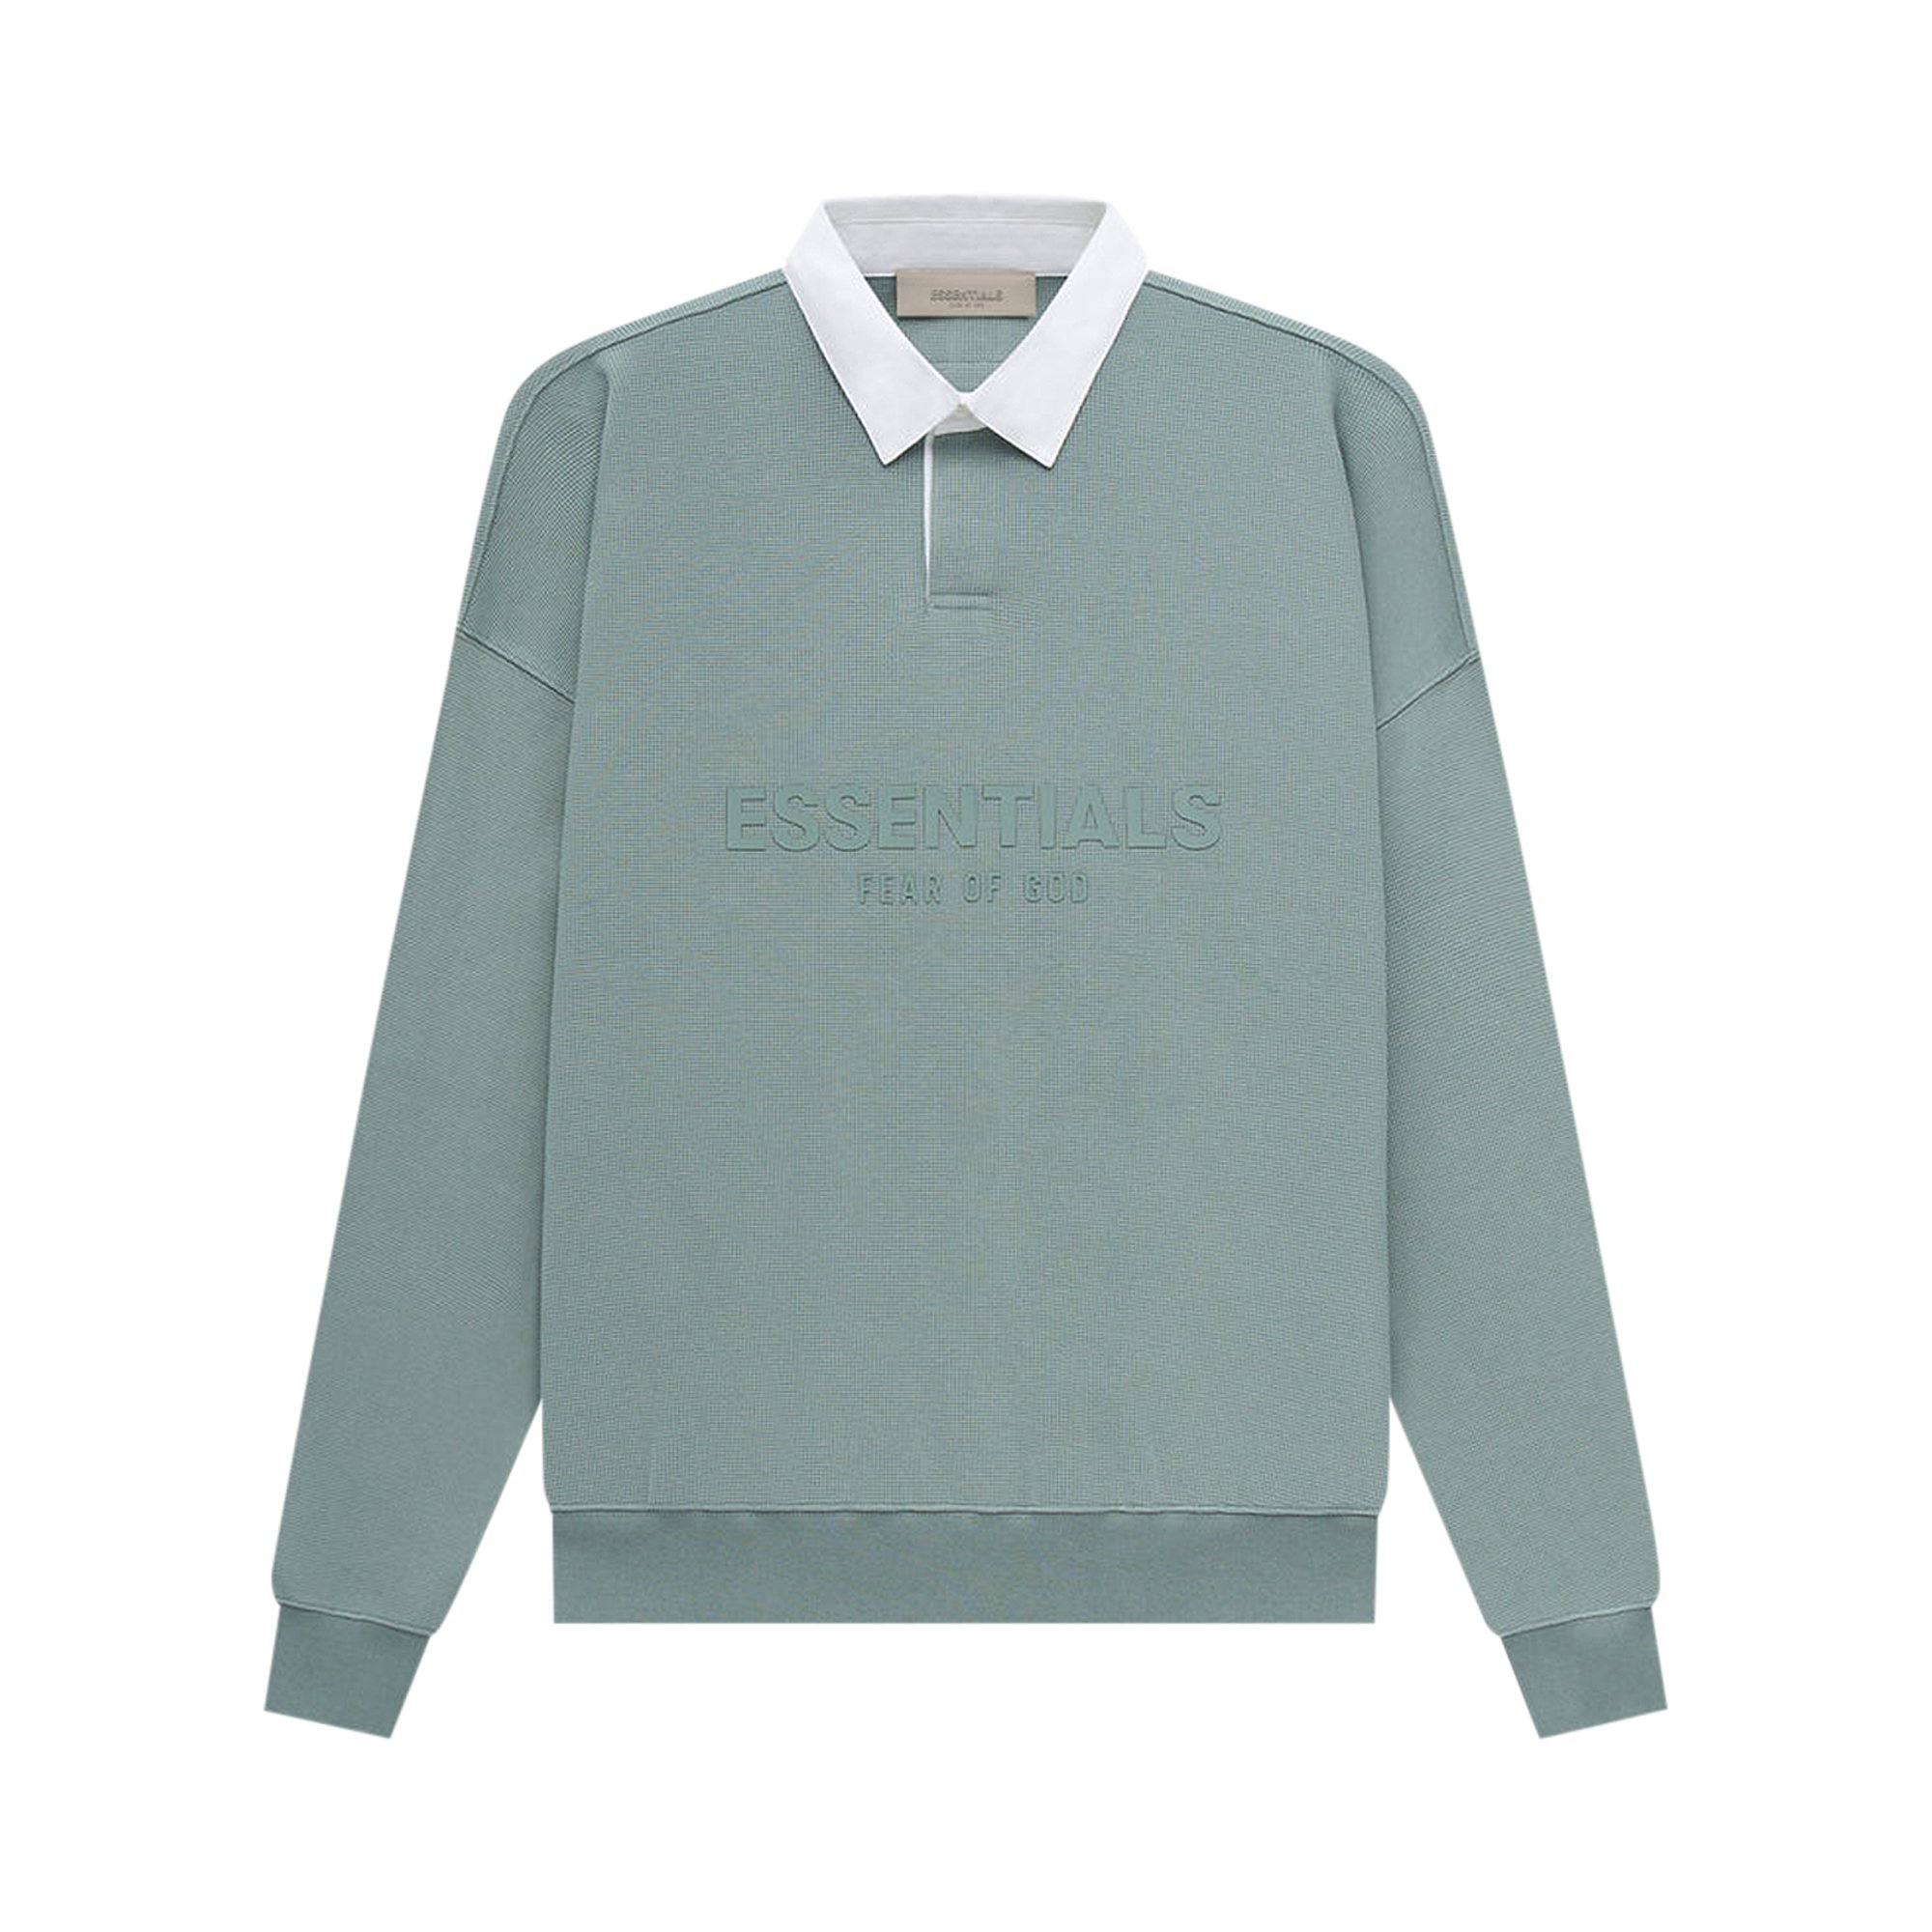 Buy Fear of God Essentials Waffle Henley Rugby 'Sycamore